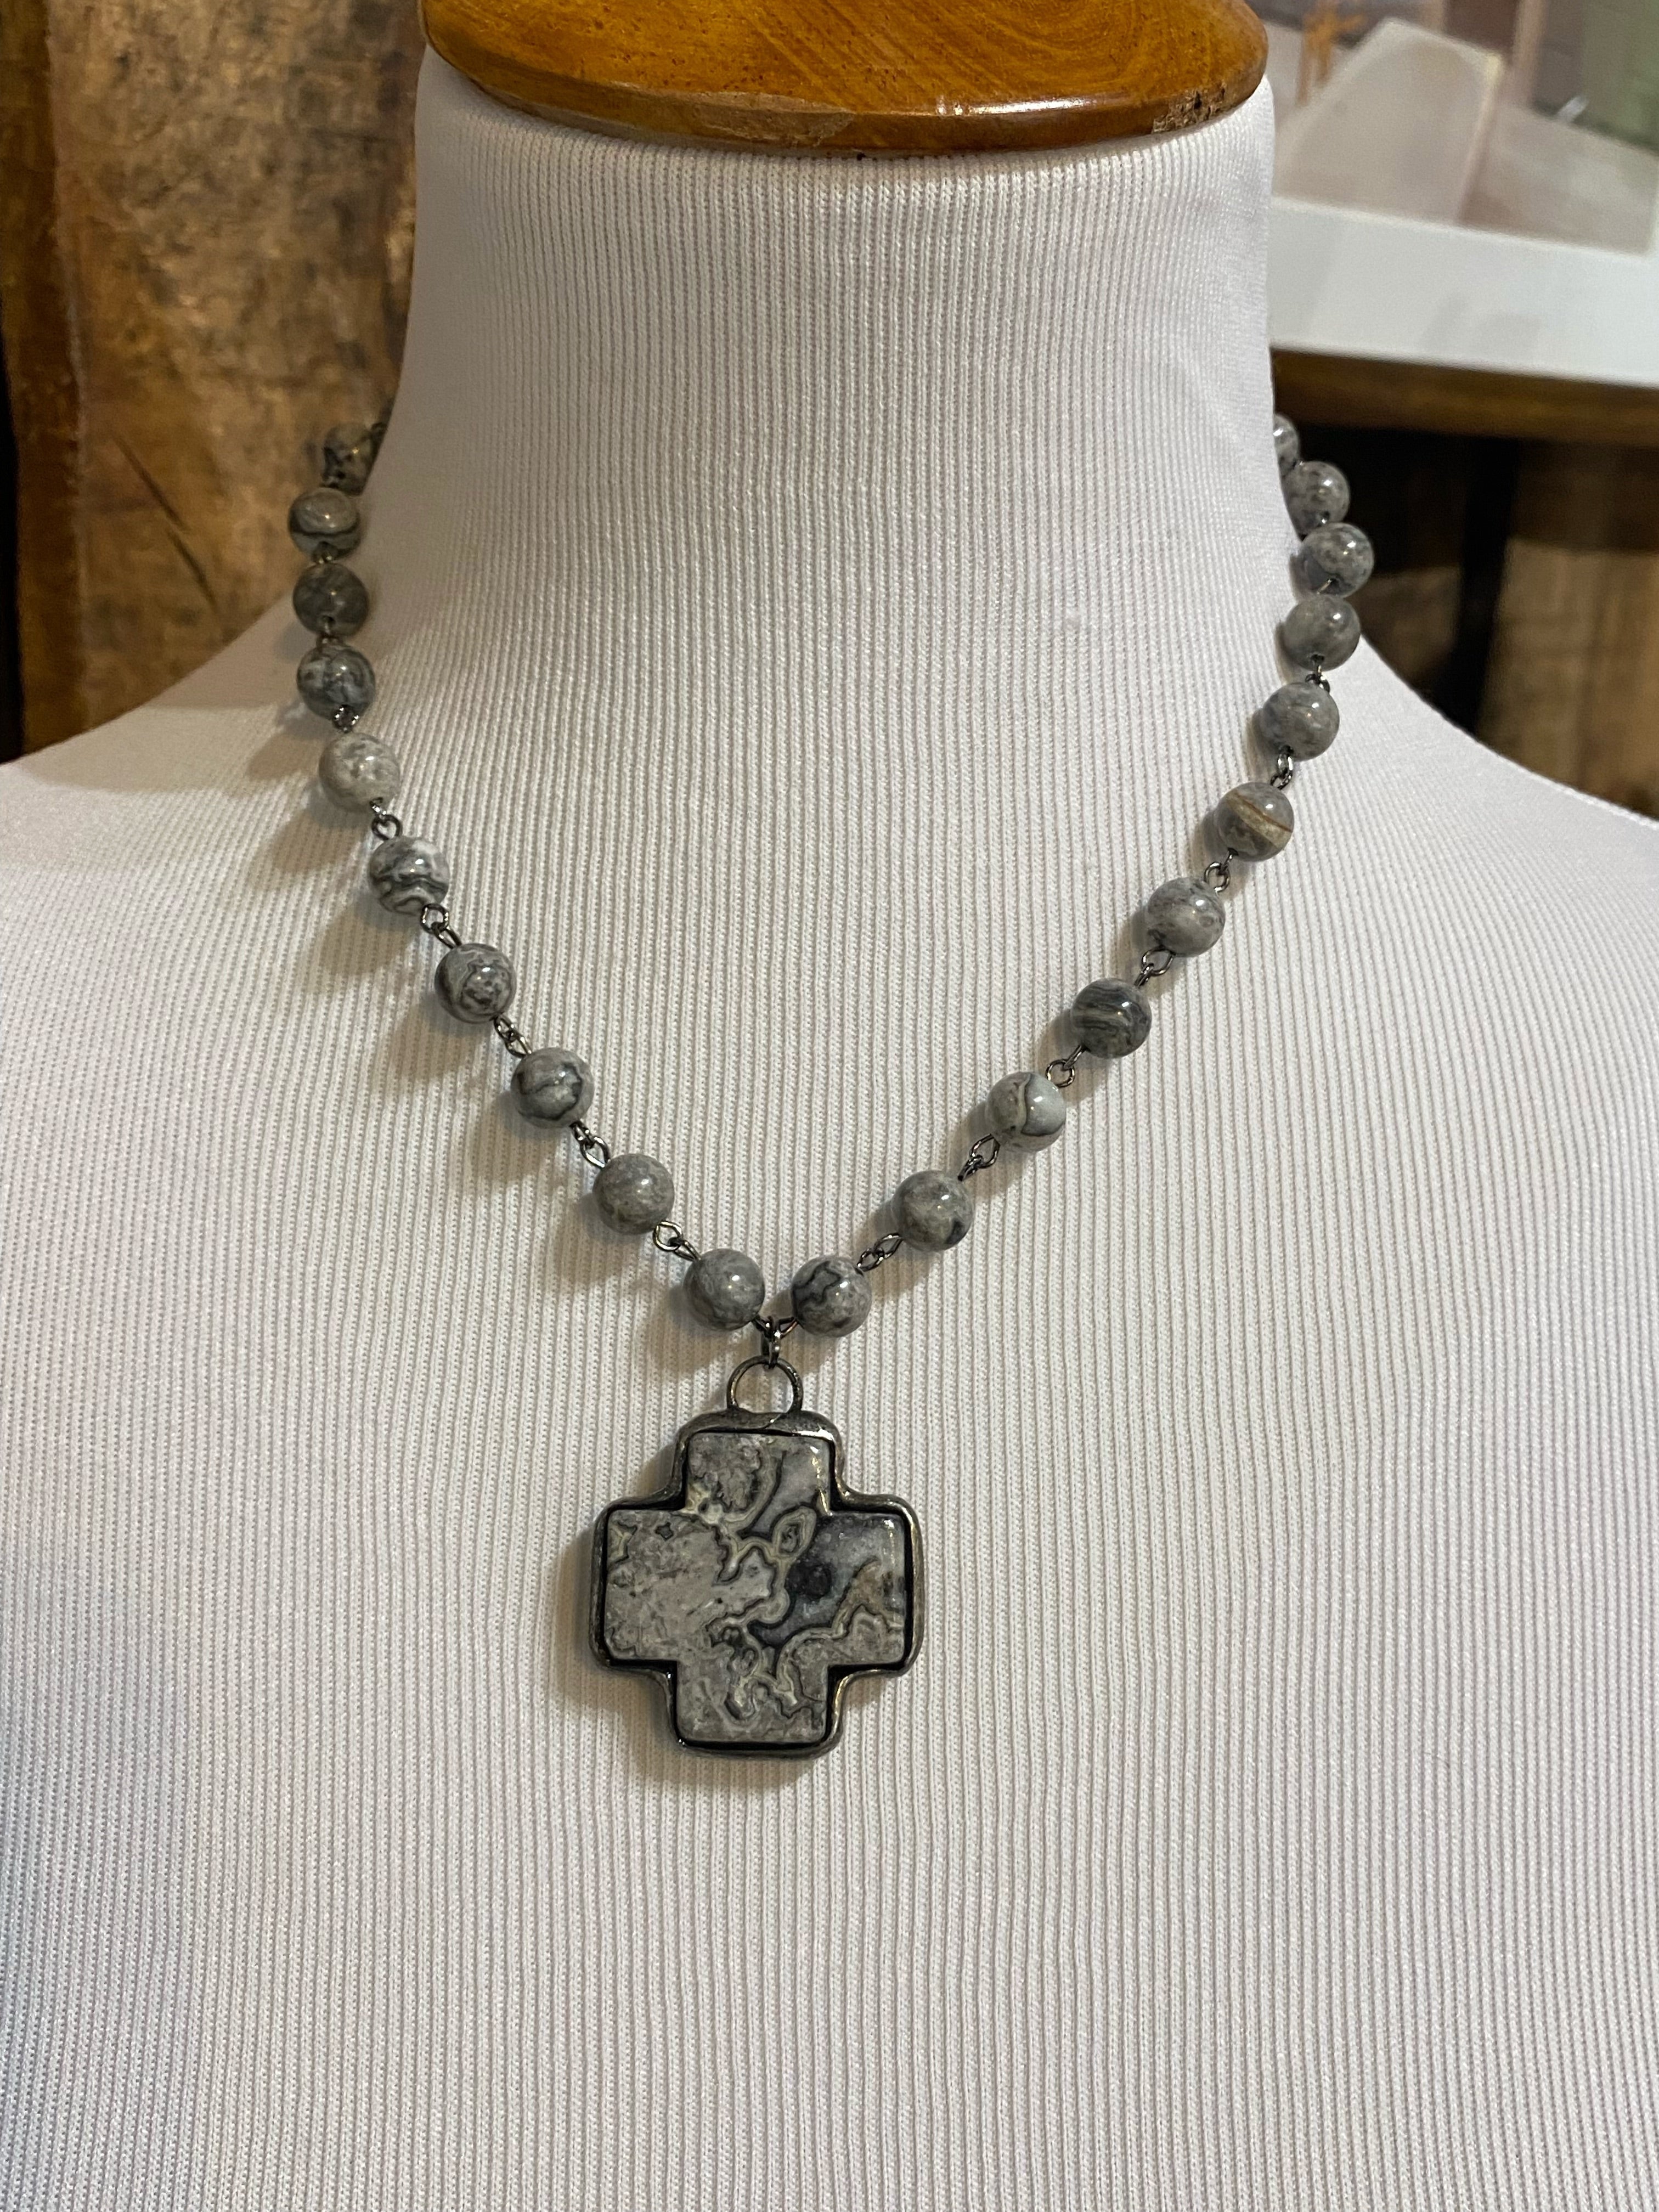 Gray Stone Necklace